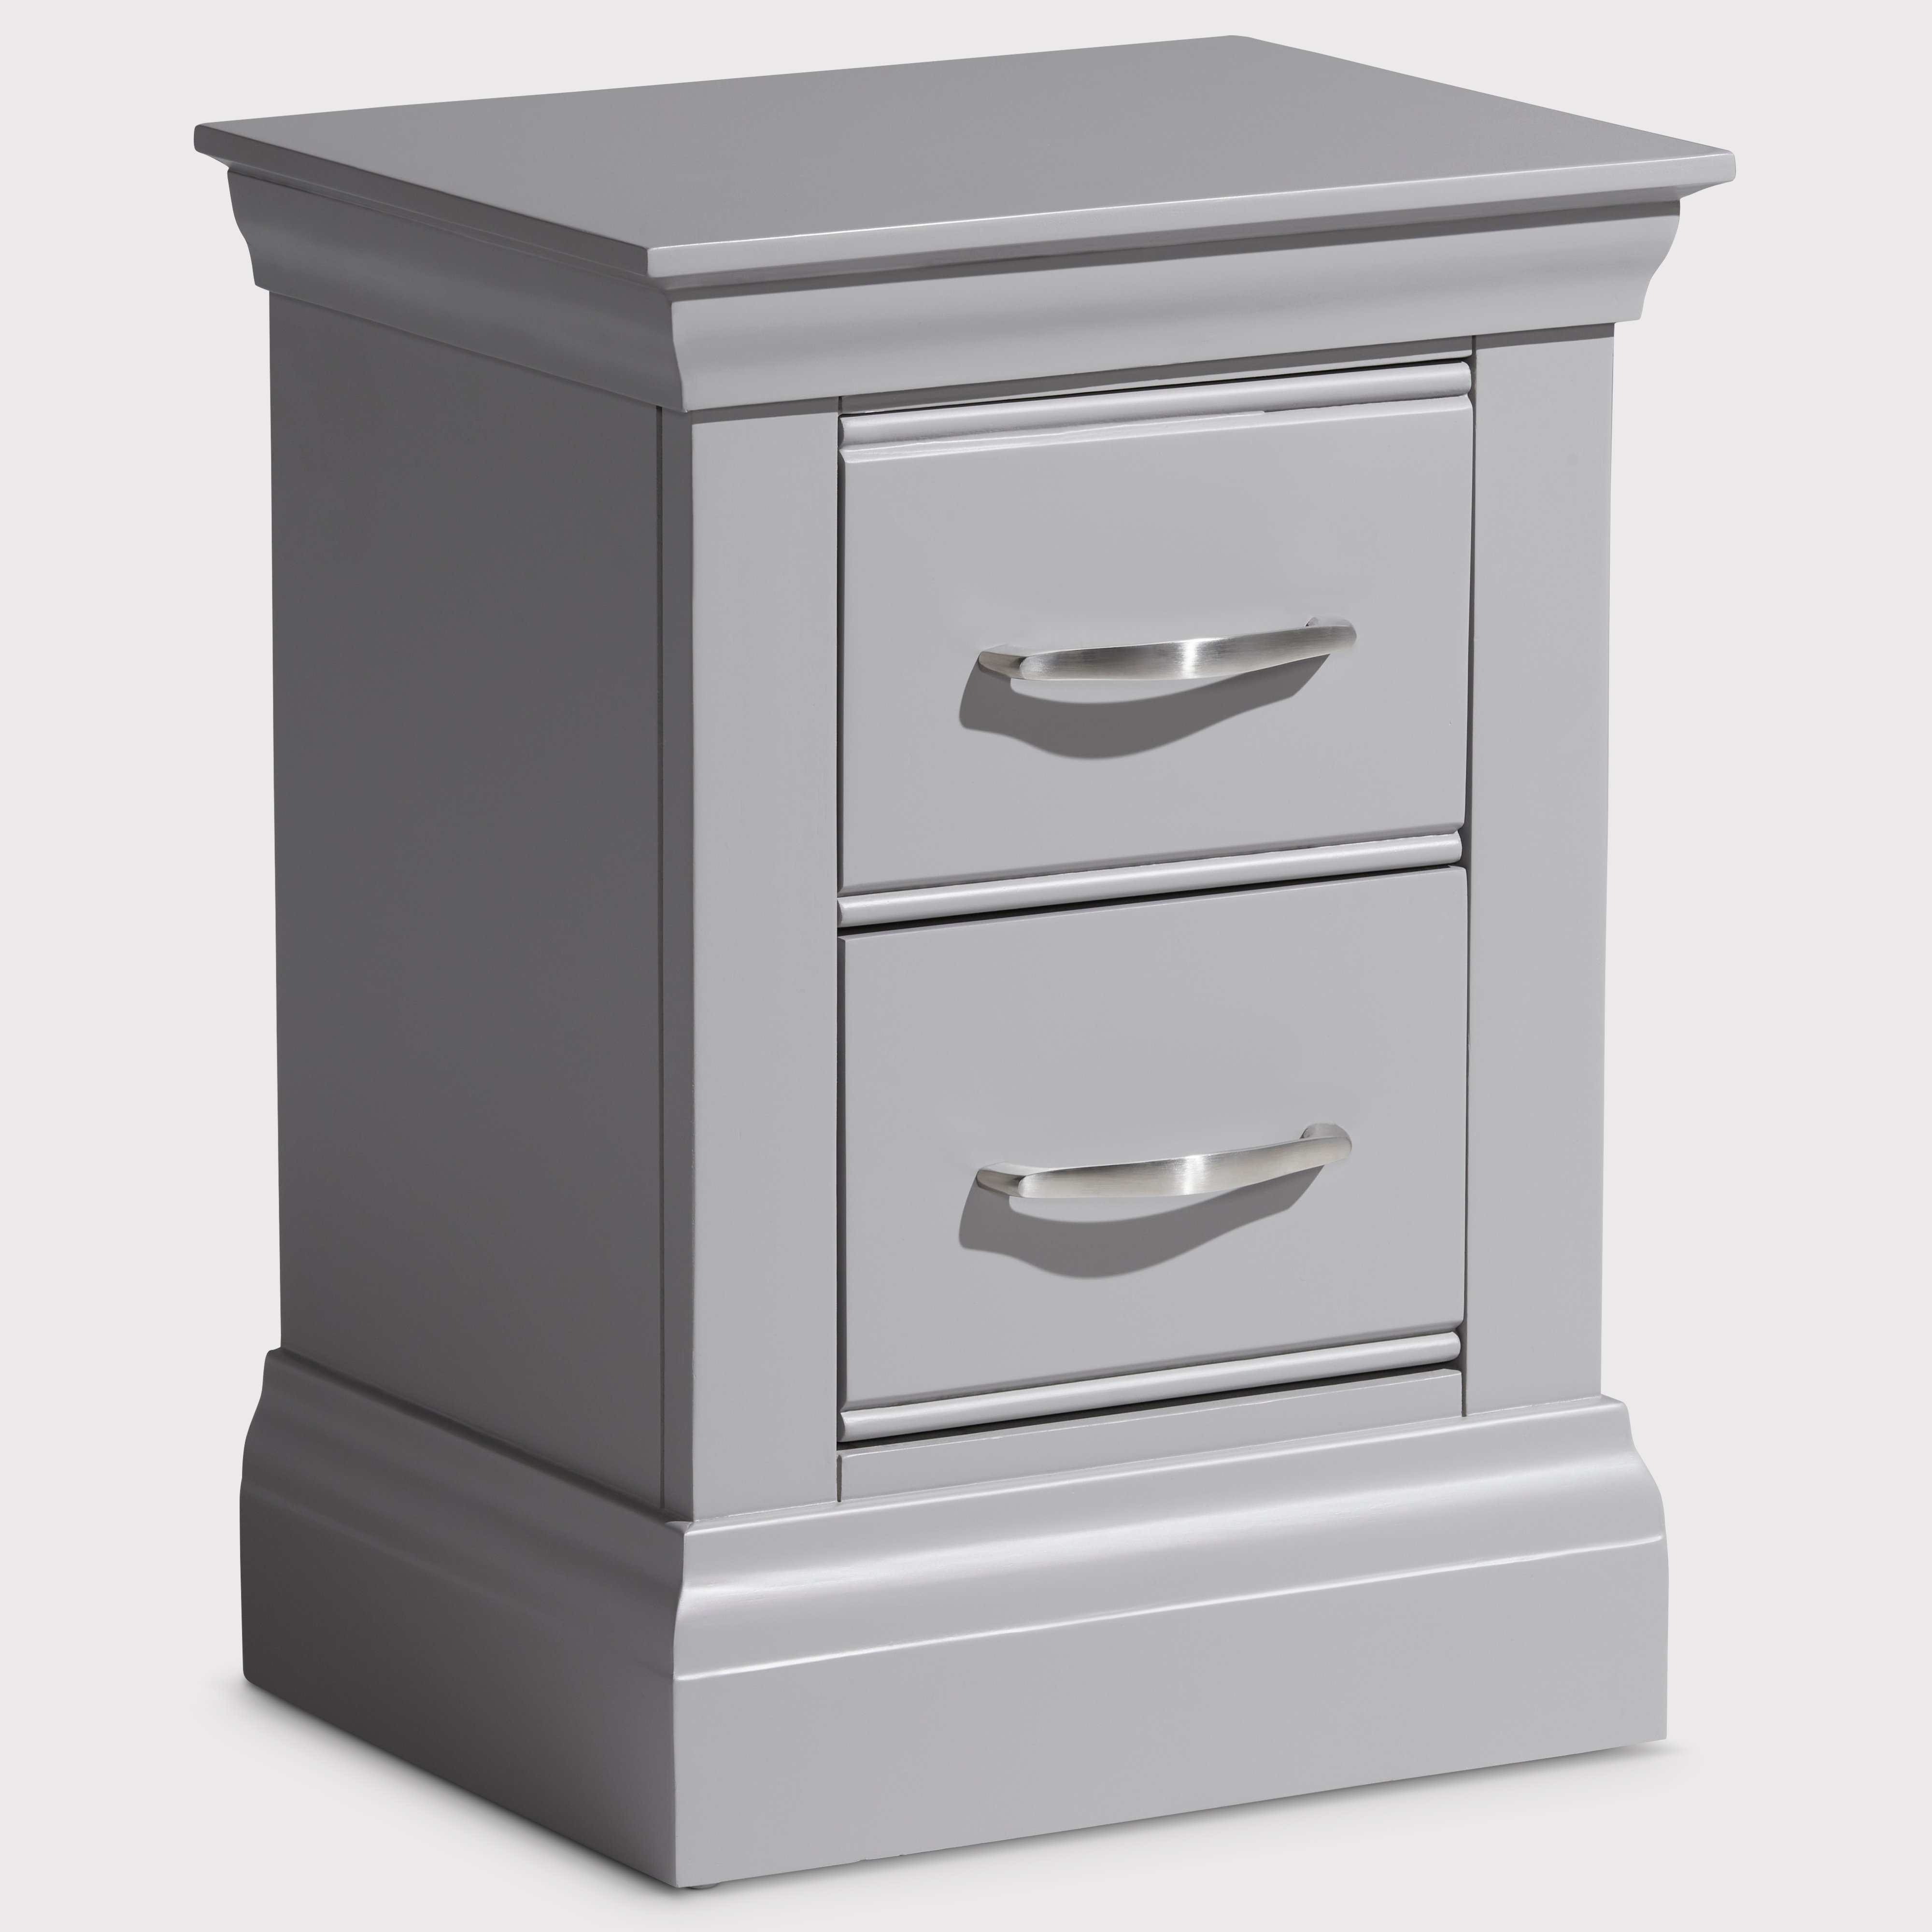 Helmsley Small 2 Drawer Bedside Table, Grey | Barker & Stonehouse